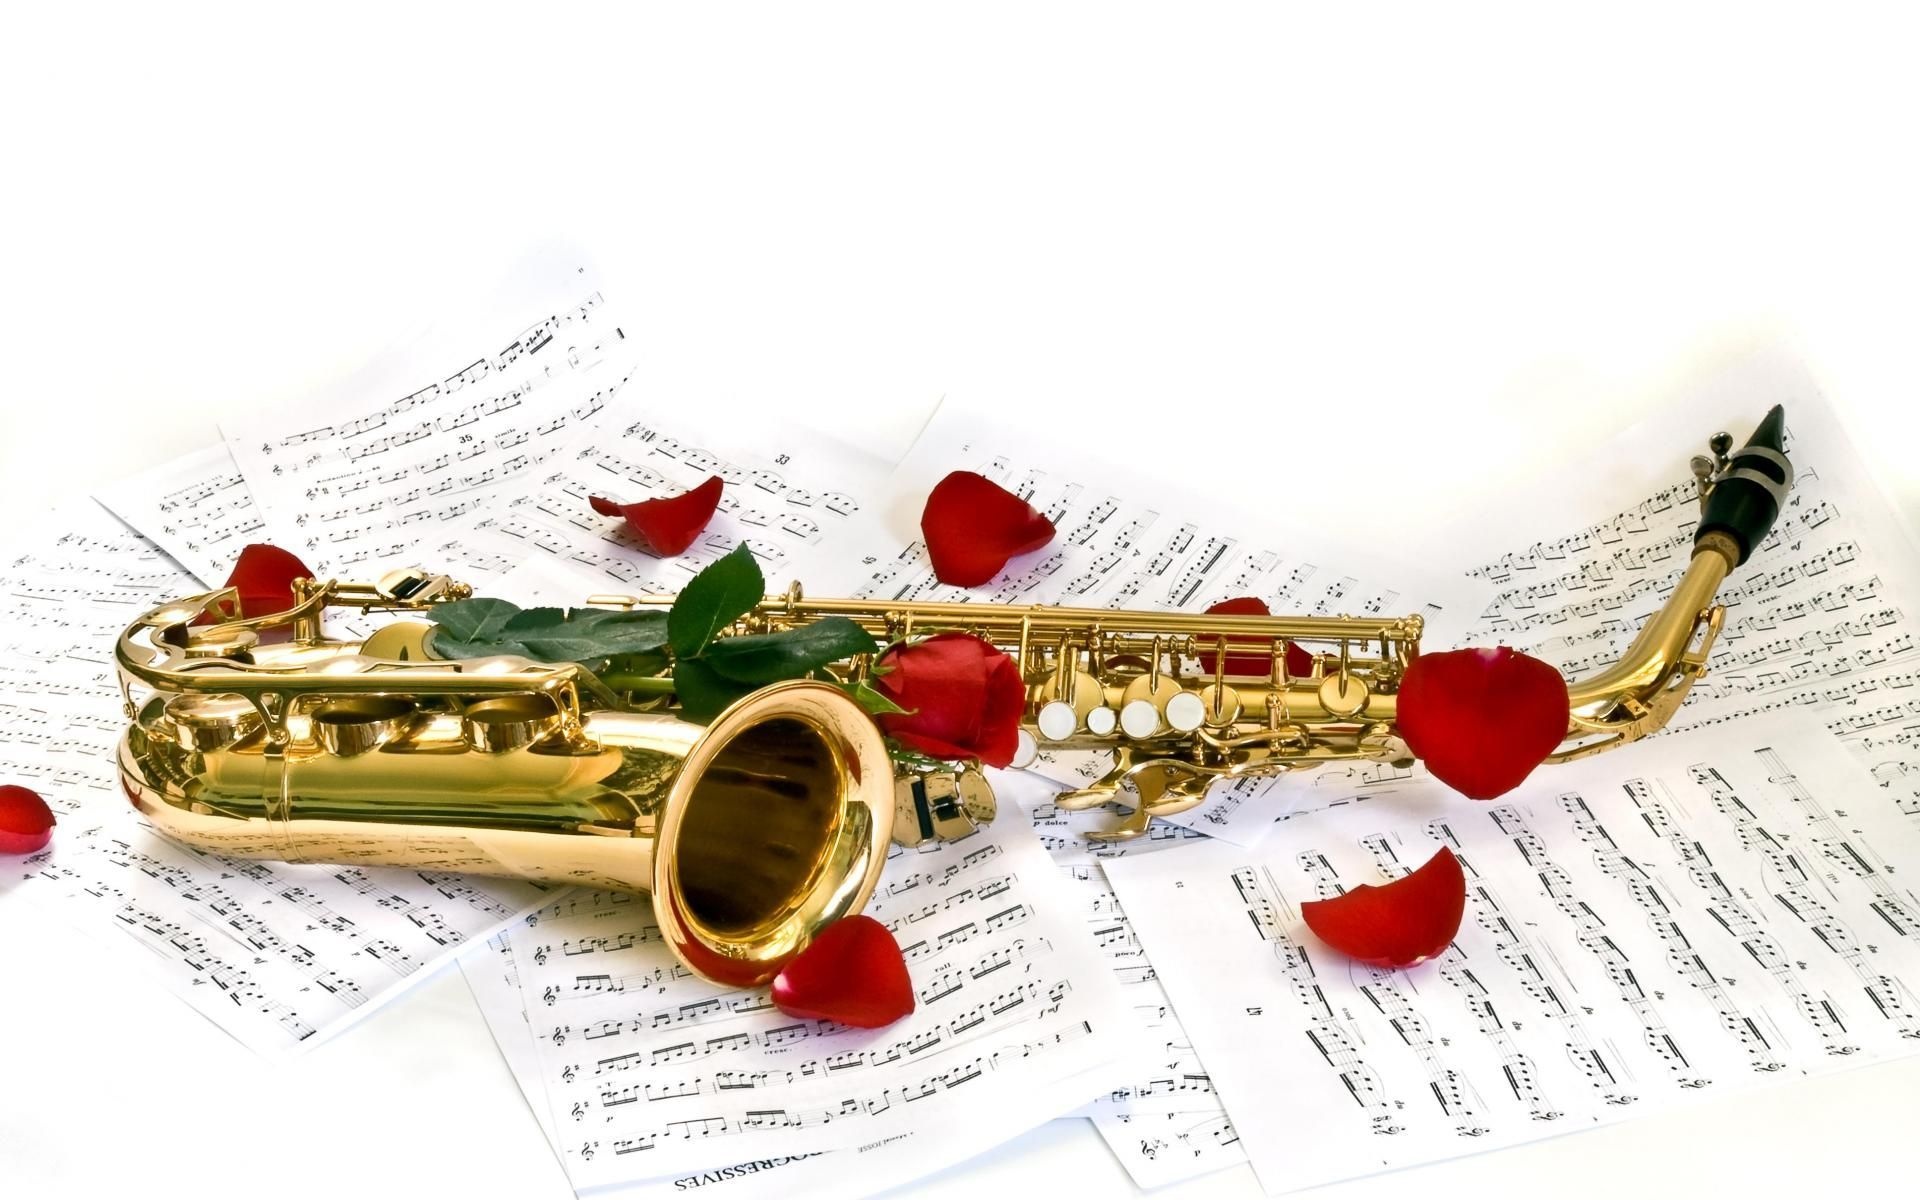 Saxophone: A musical instrument played by blowing into a mouthpiece and pressing keys with fingers. 1920x1200 HD Wallpaper.